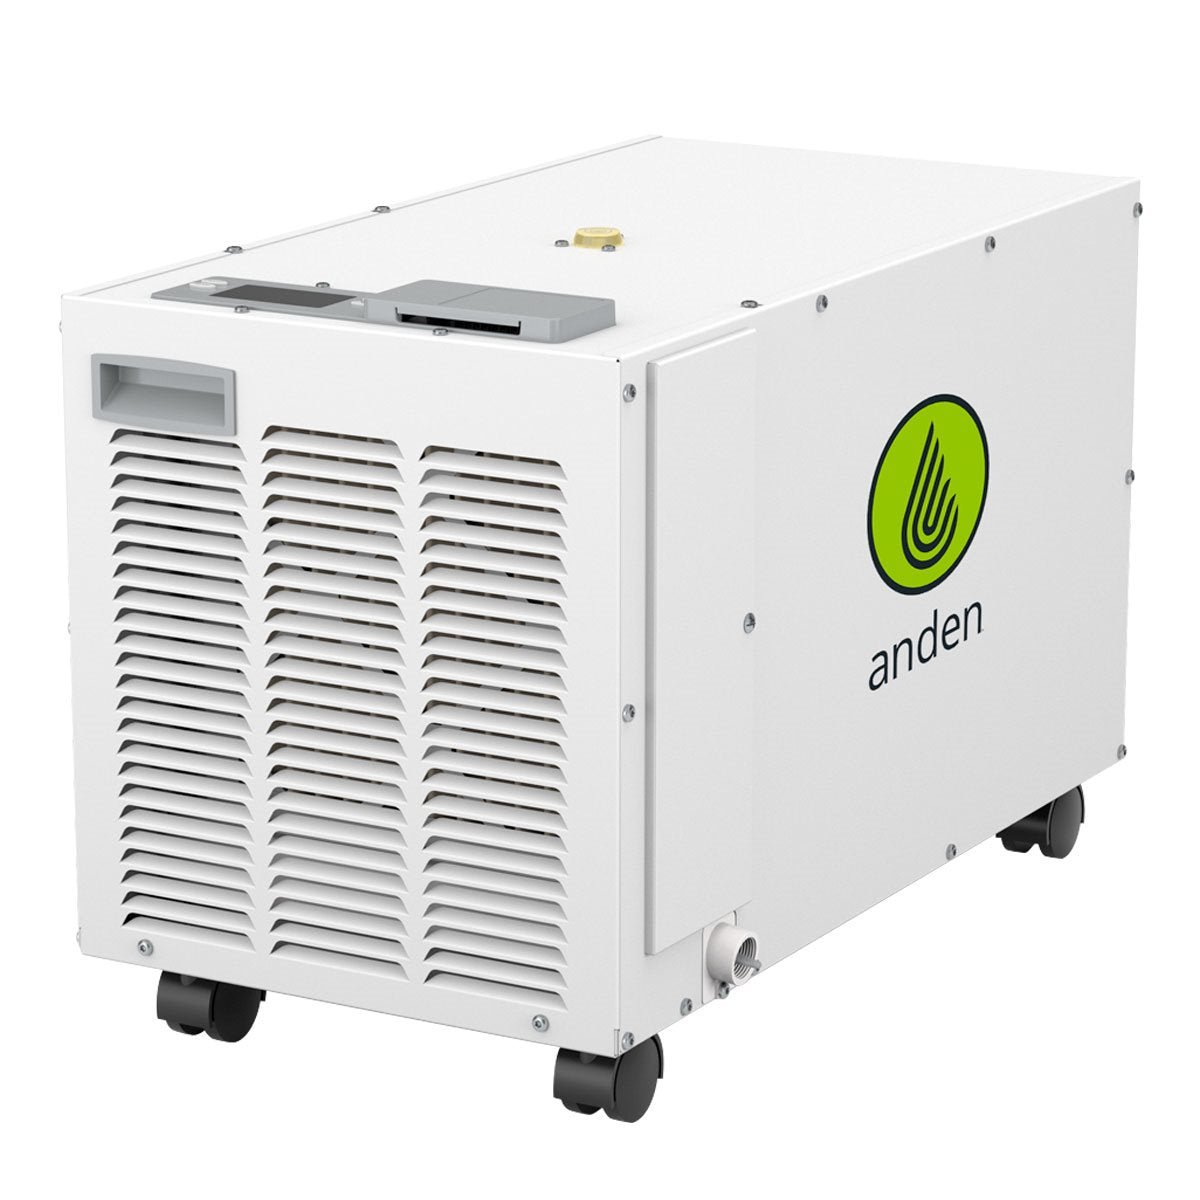 Product Image:Anden Dehumidifier 100 Pints / Day W / Caster Wheel